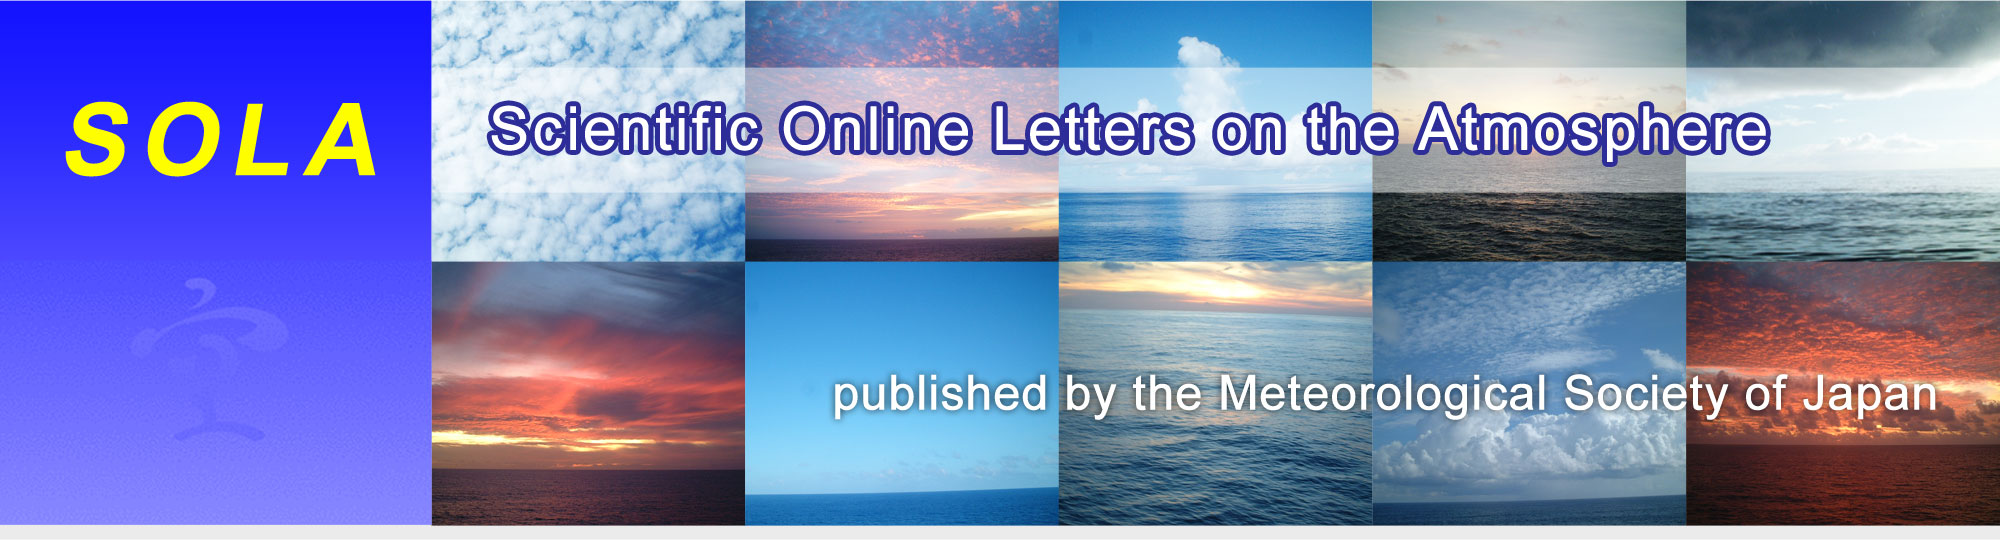 SOLA@Scientific Online Letters on the Atmosphere